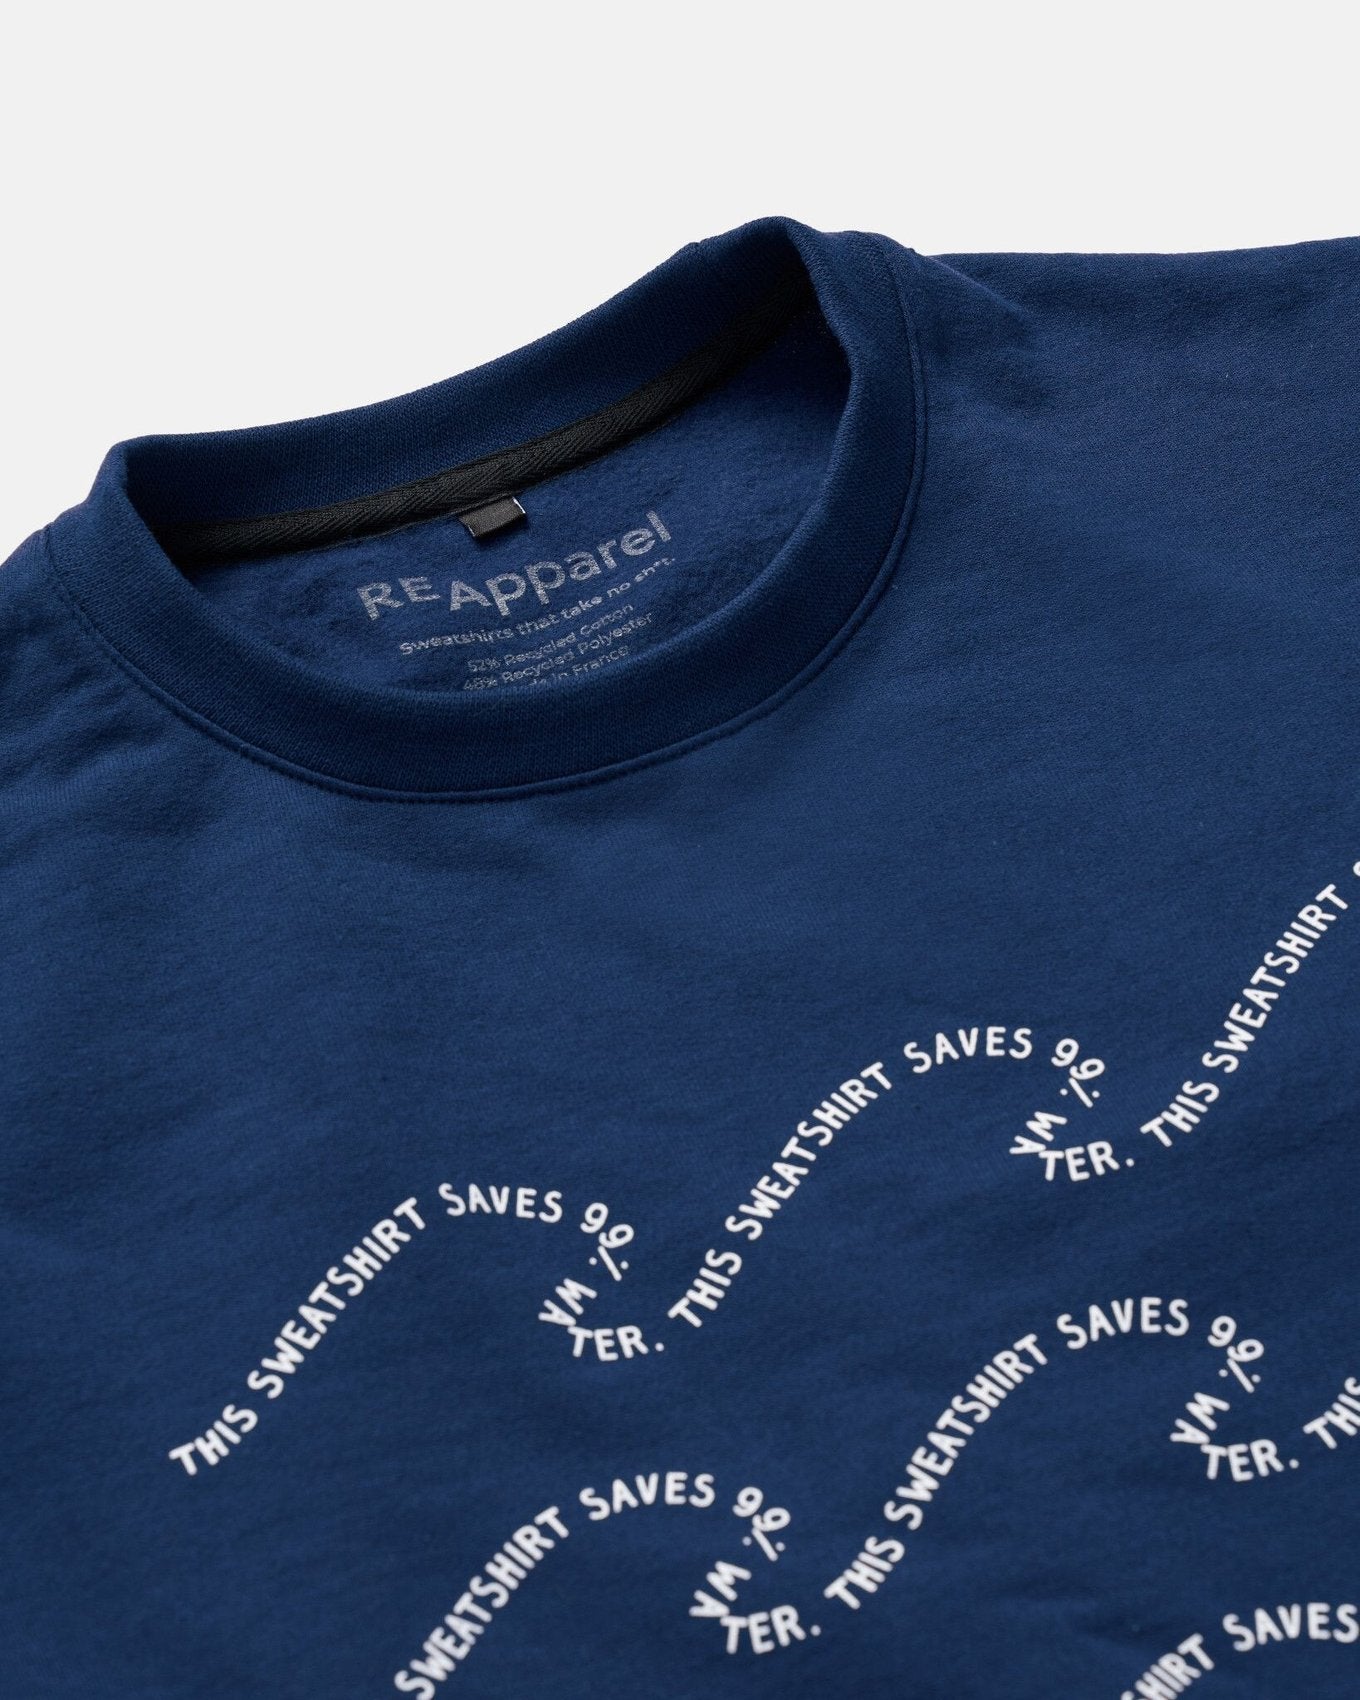 ReApparel Save Crew Neck . in color Navy Blue and shape long sleeve